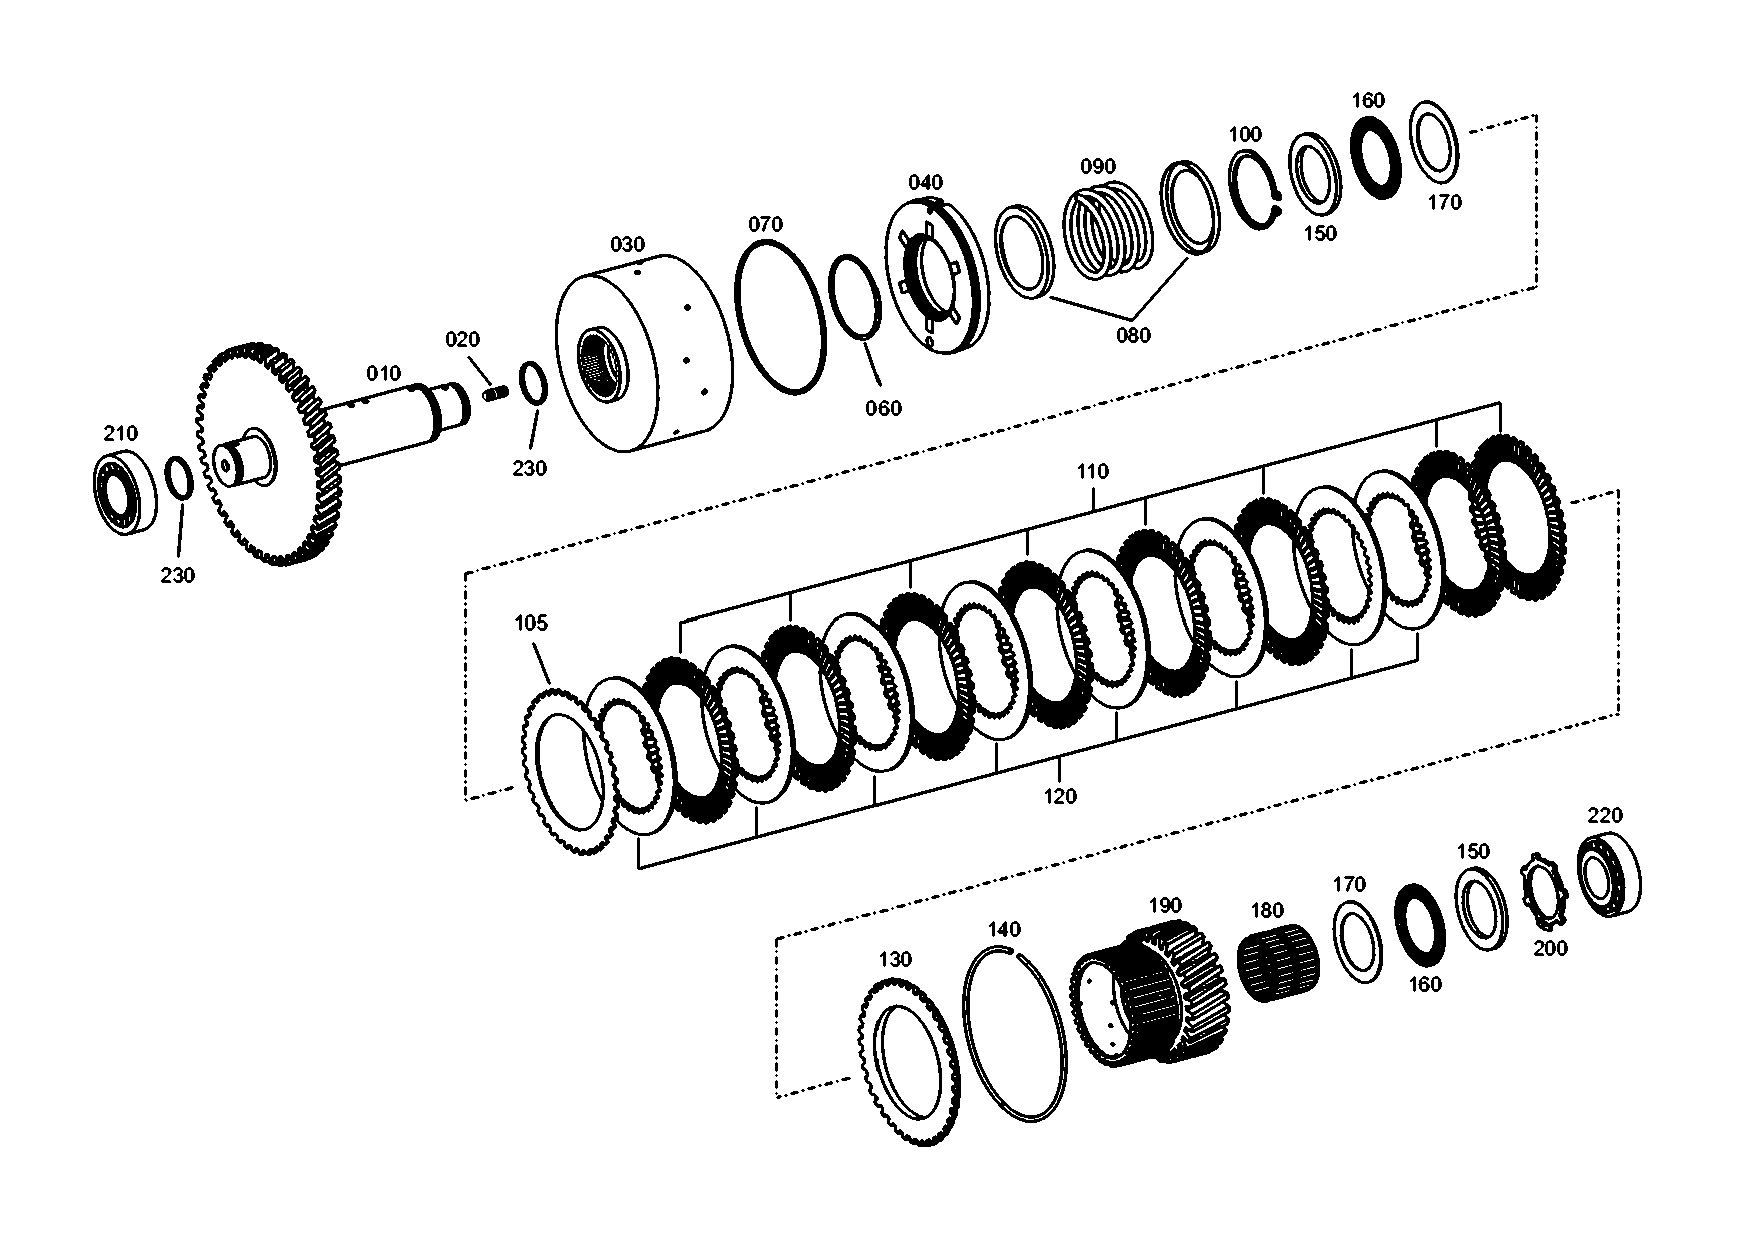 drawing for PPM 6089130 - OUTER CLUTCH DISK (figure 1)